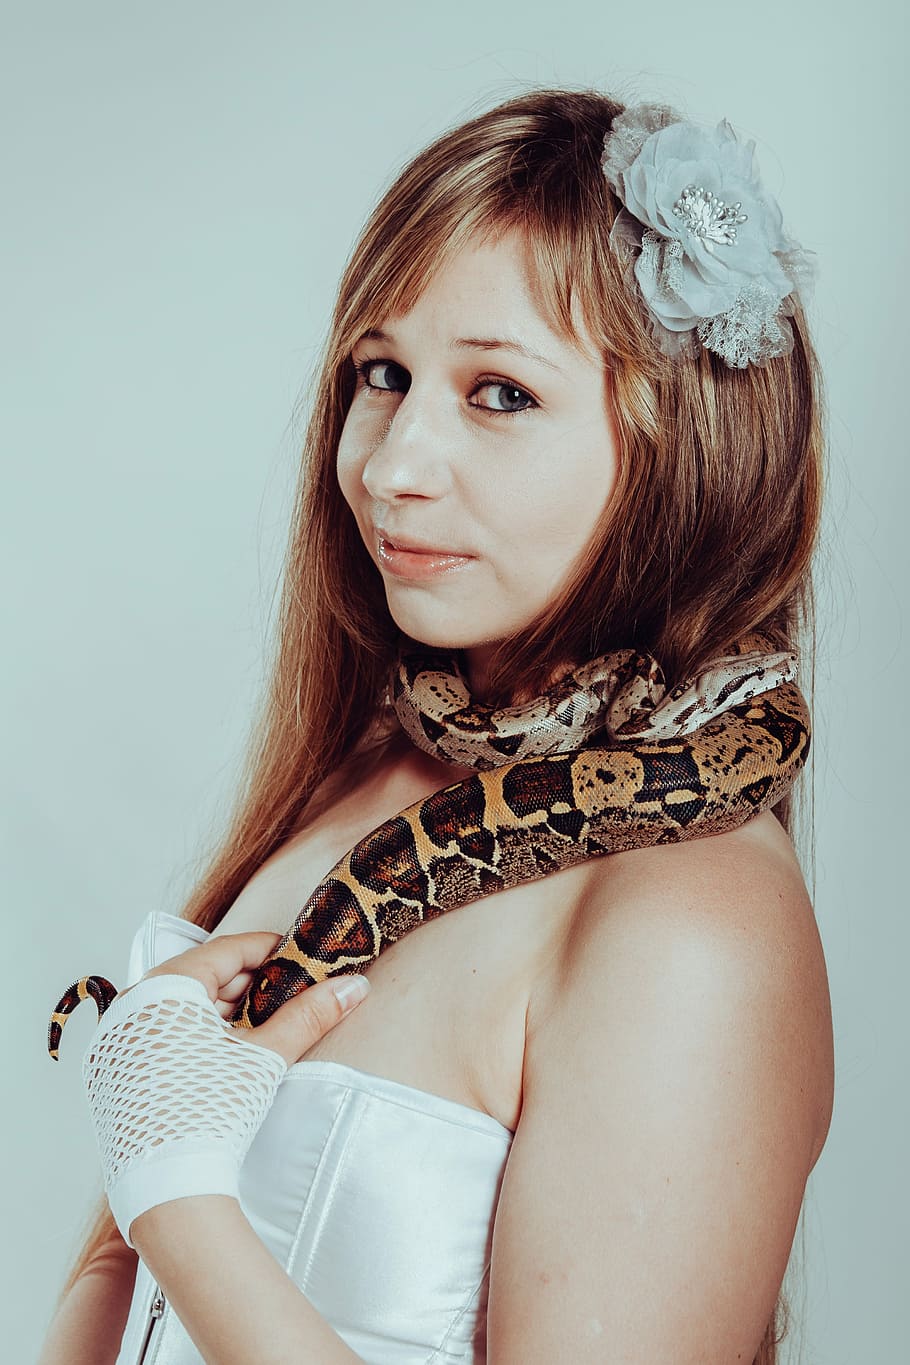 boa constrictor, snake, woman, with a snake, lovely, portrait